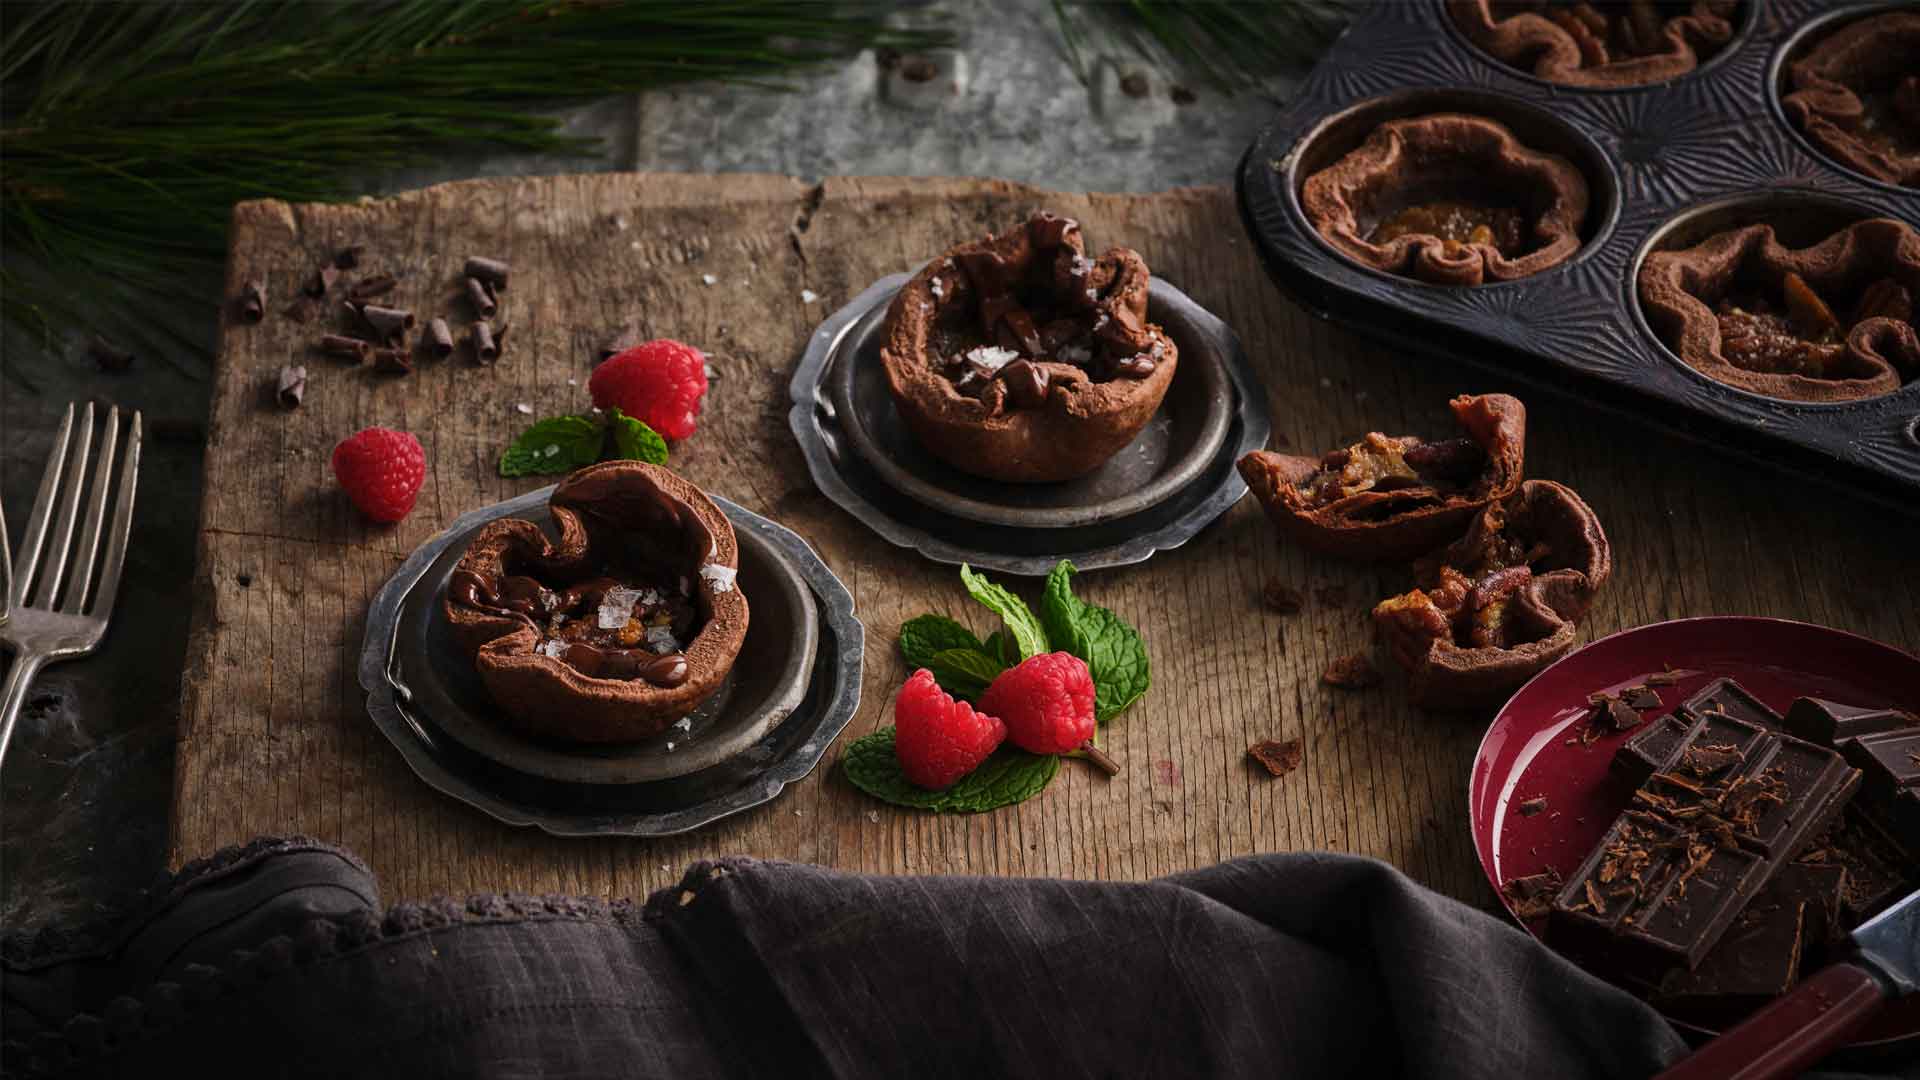 Chocolate butter tarts with flakes of sea salt on top on wooden serving board.